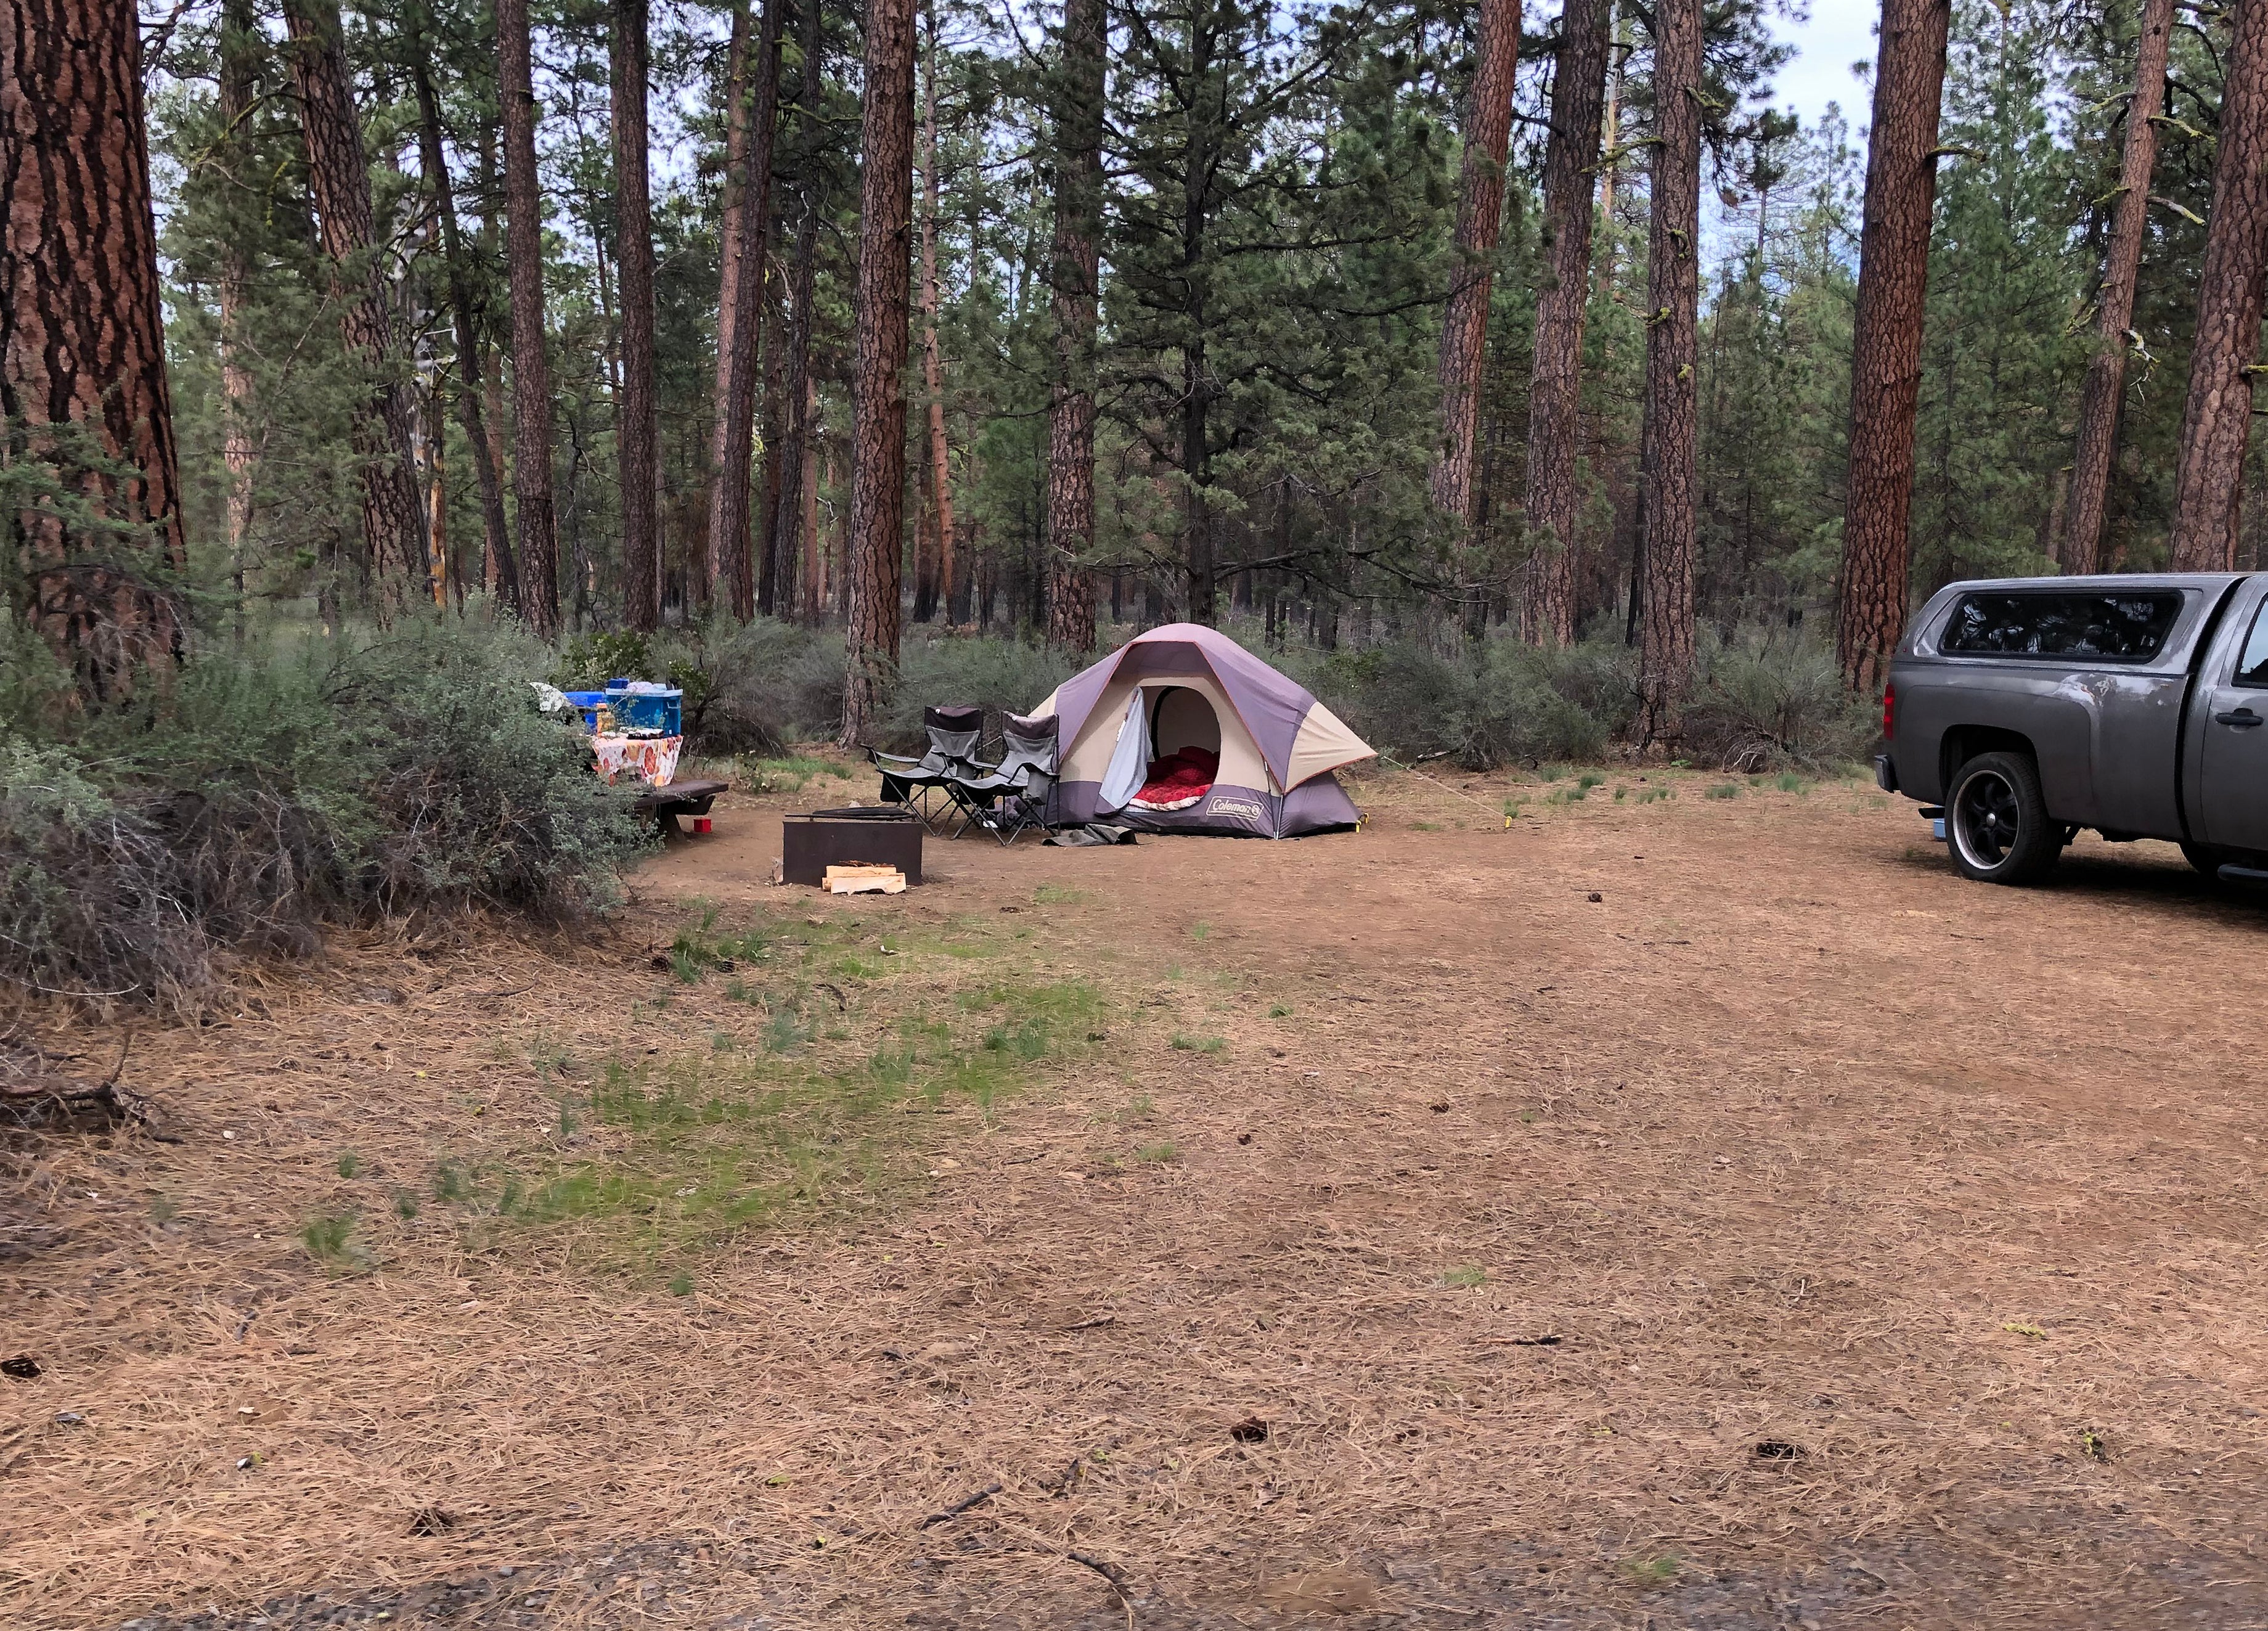 Camper submitted image from Indian Ford Campground - 5